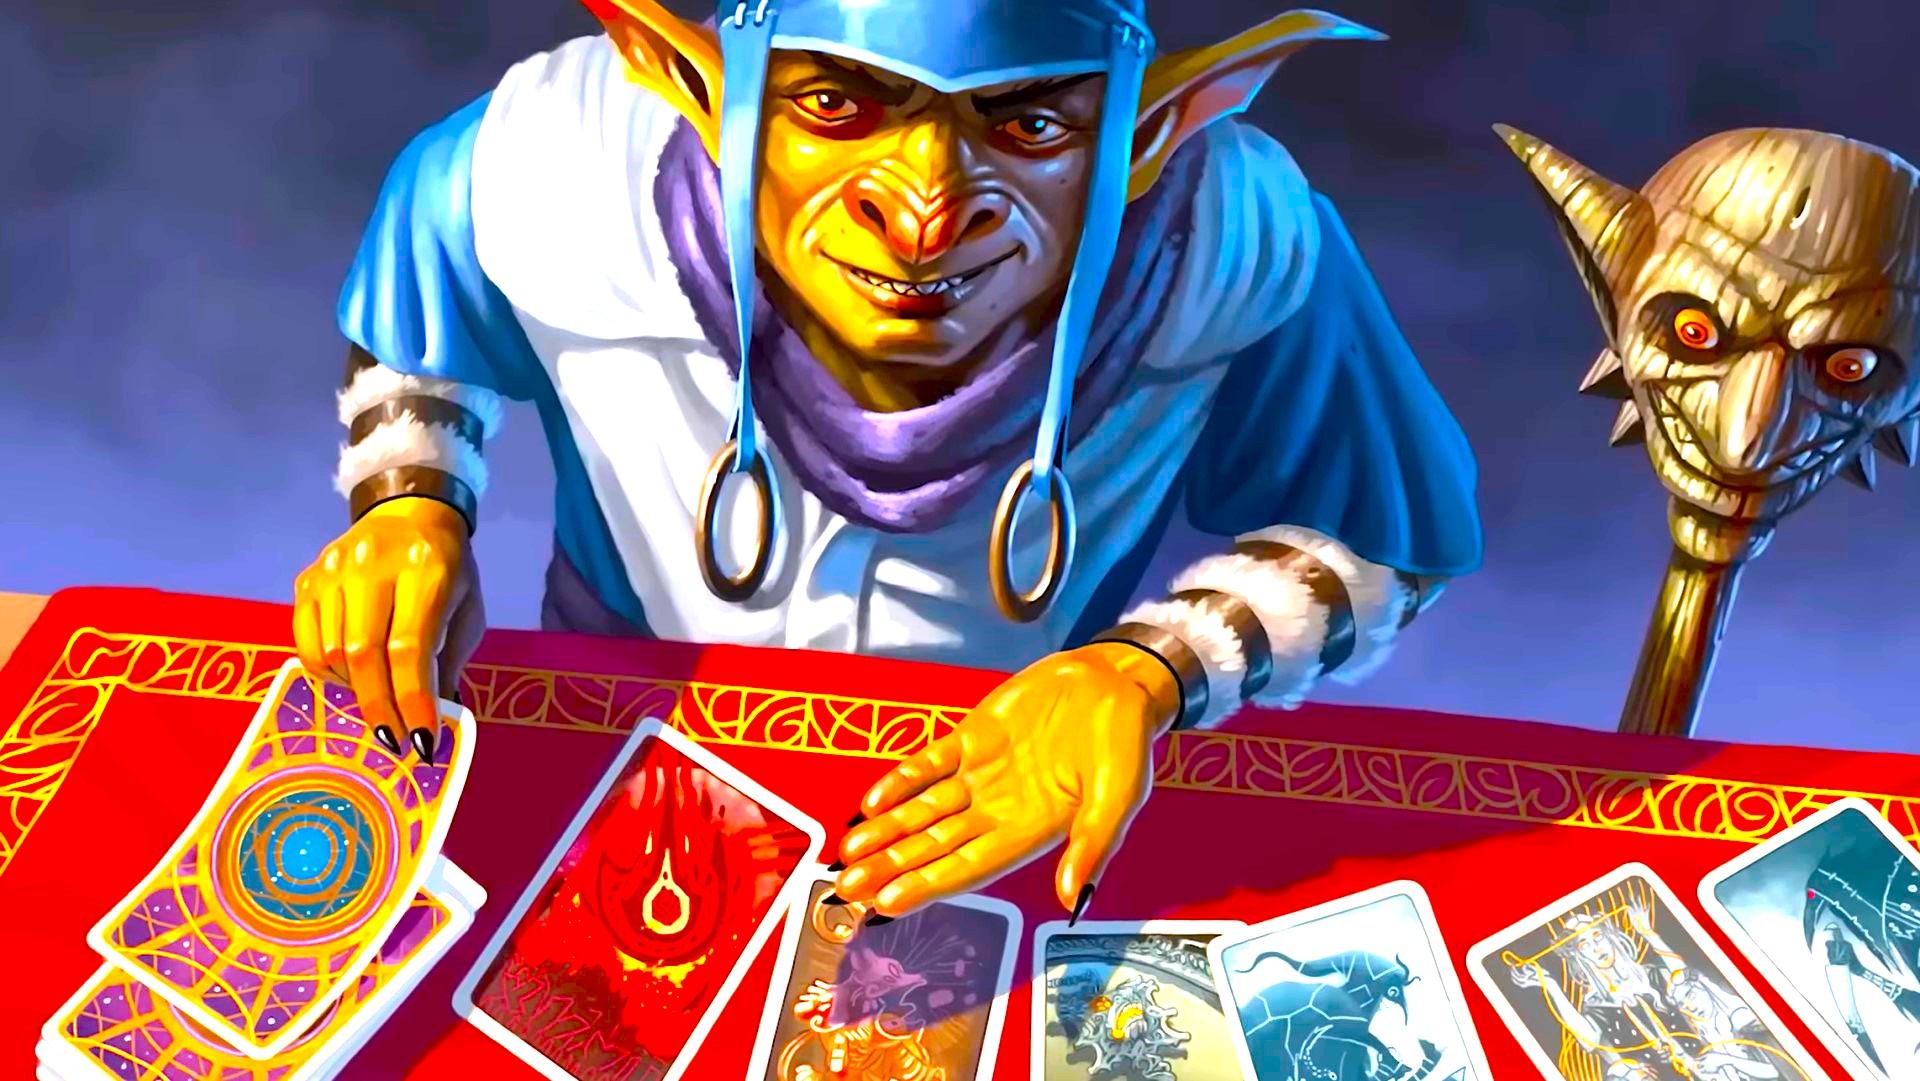 Best Magic Items For Wizards In D&D 5e, Ranked